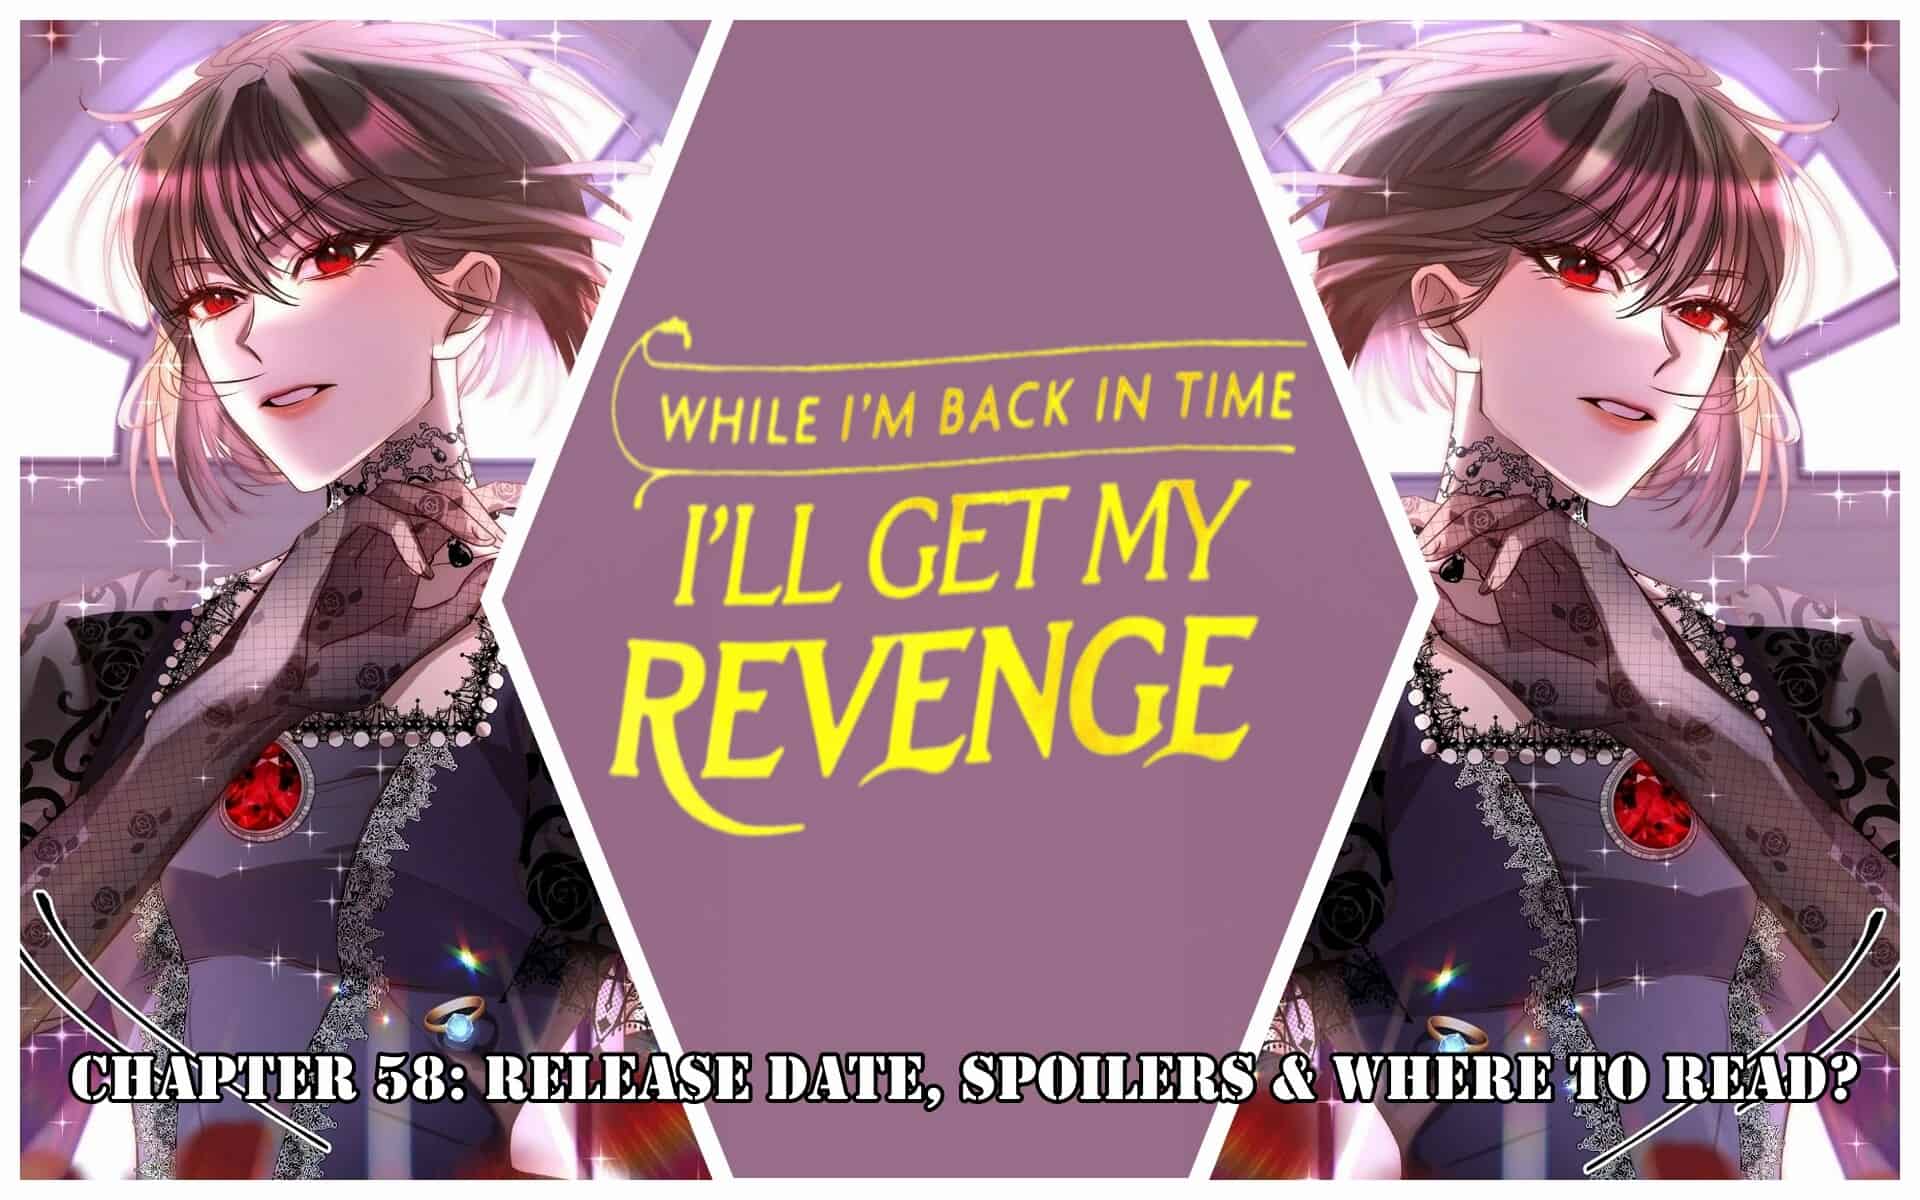 While I’m Back In Time, I’ll Get My Revenge Chapter 58: Release Date, Spoilers & Where to Read?